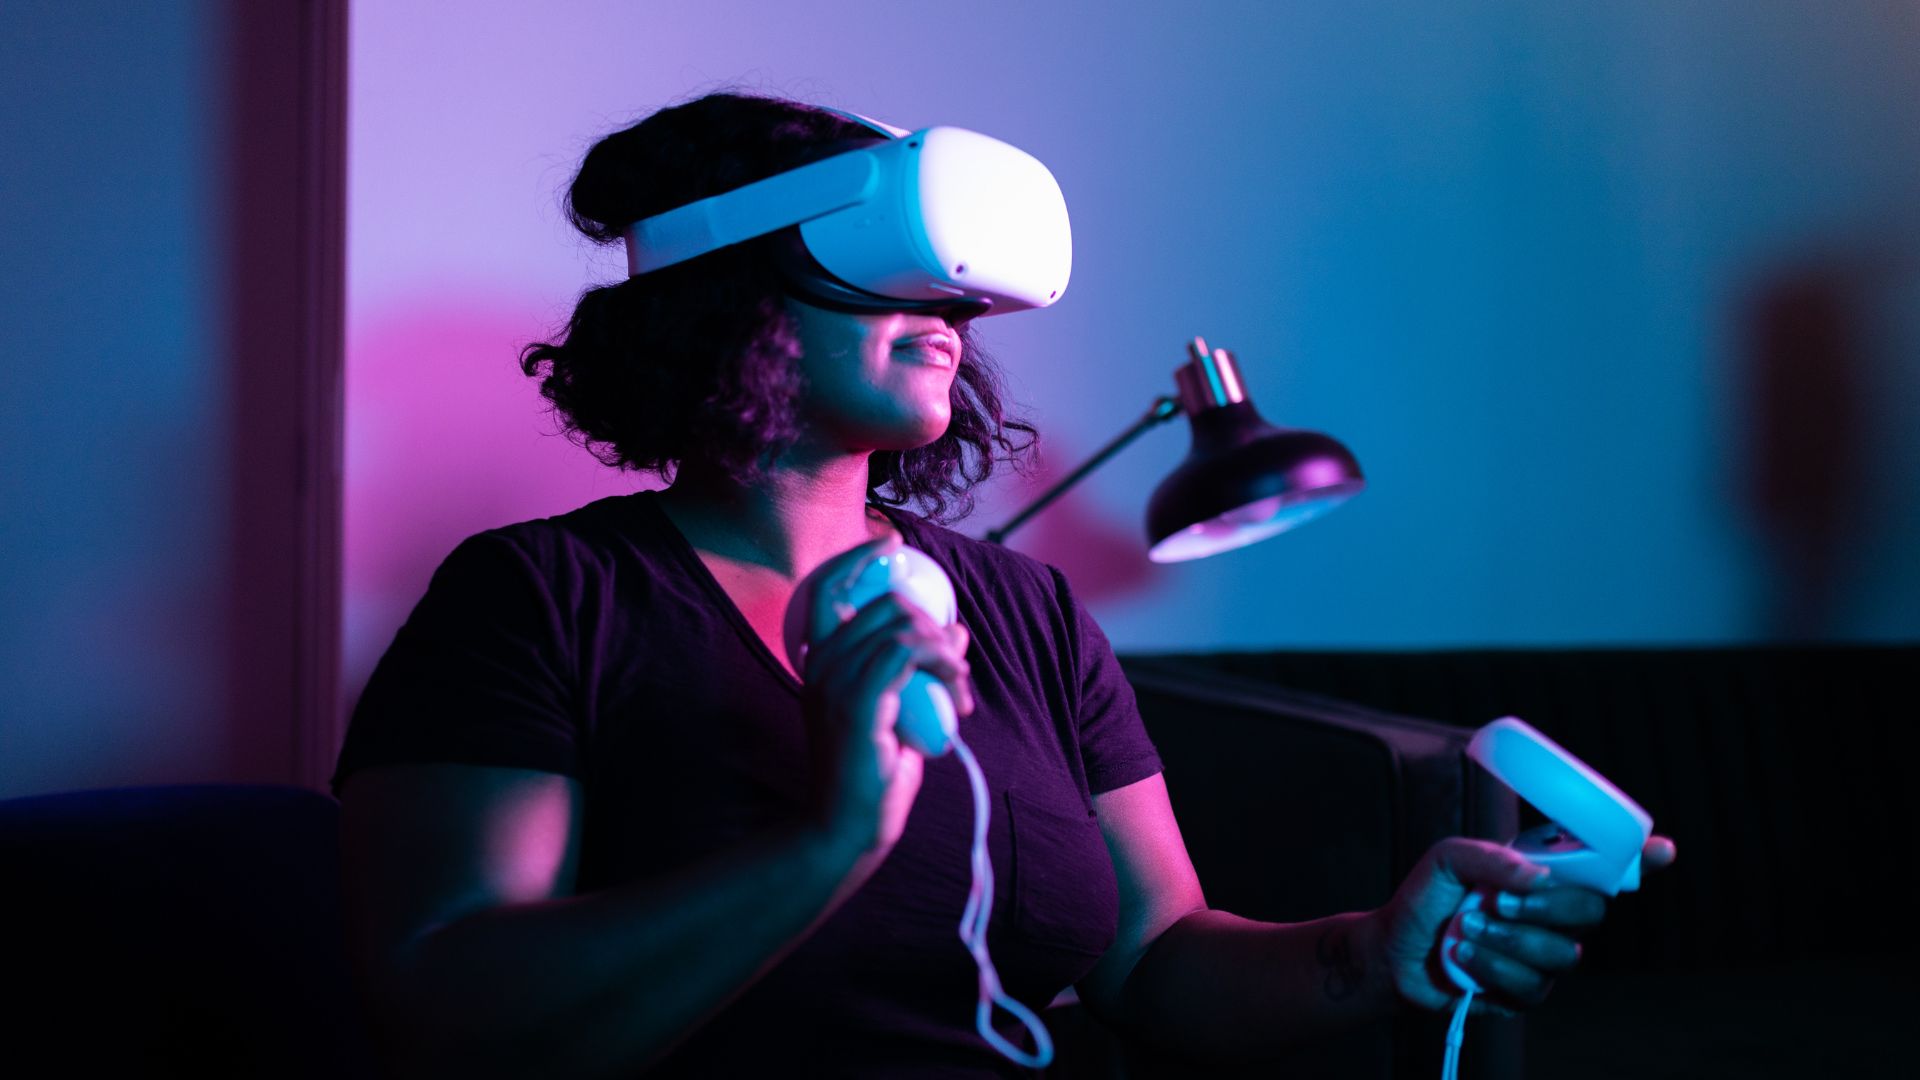 VR Game Marketing: The Complete Guide to Promoting Your VR Game